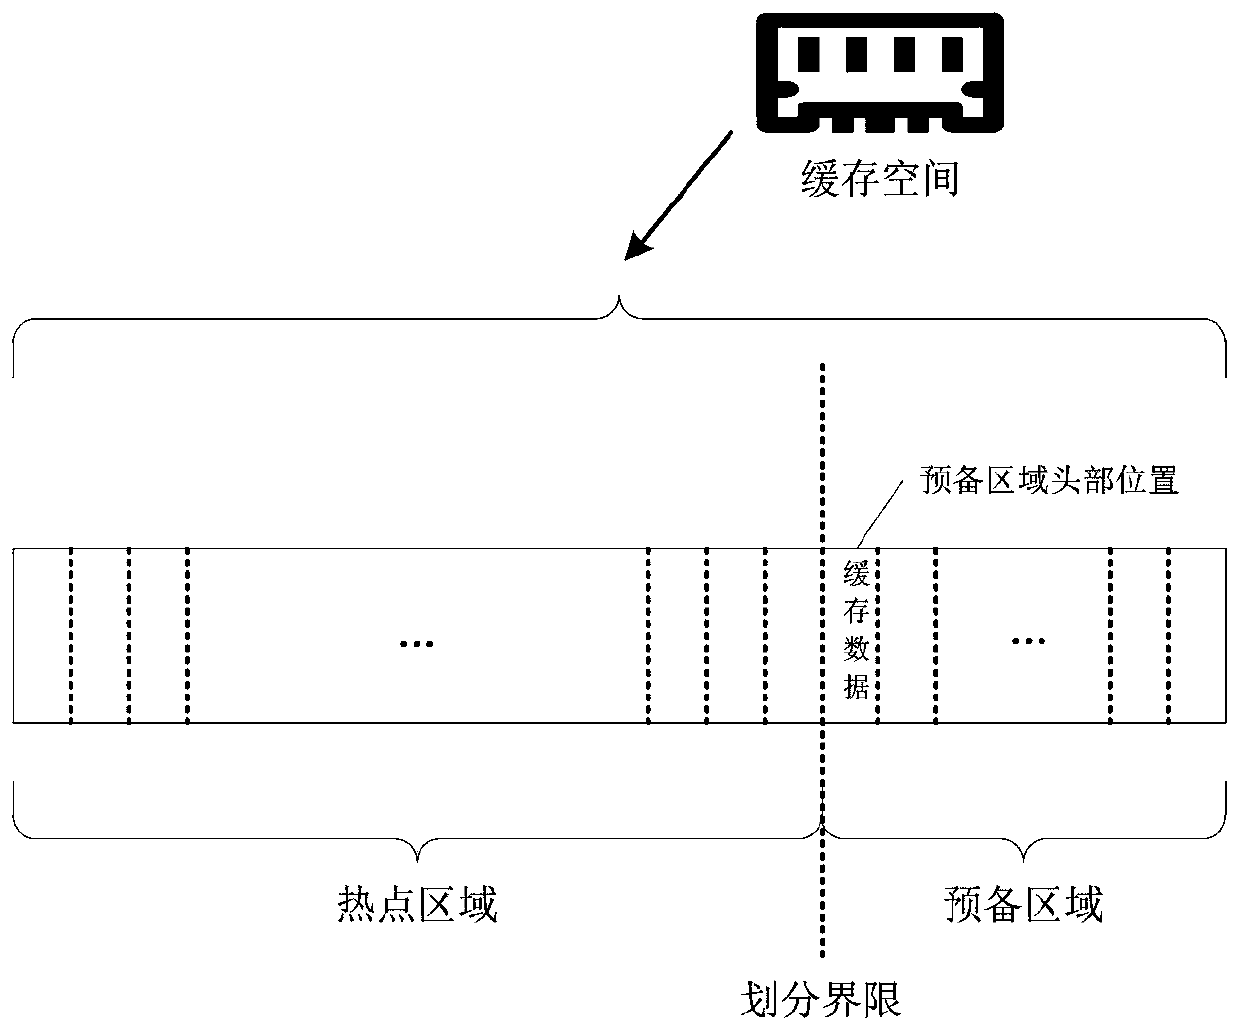 Application cache data processing method, device, equipment and system